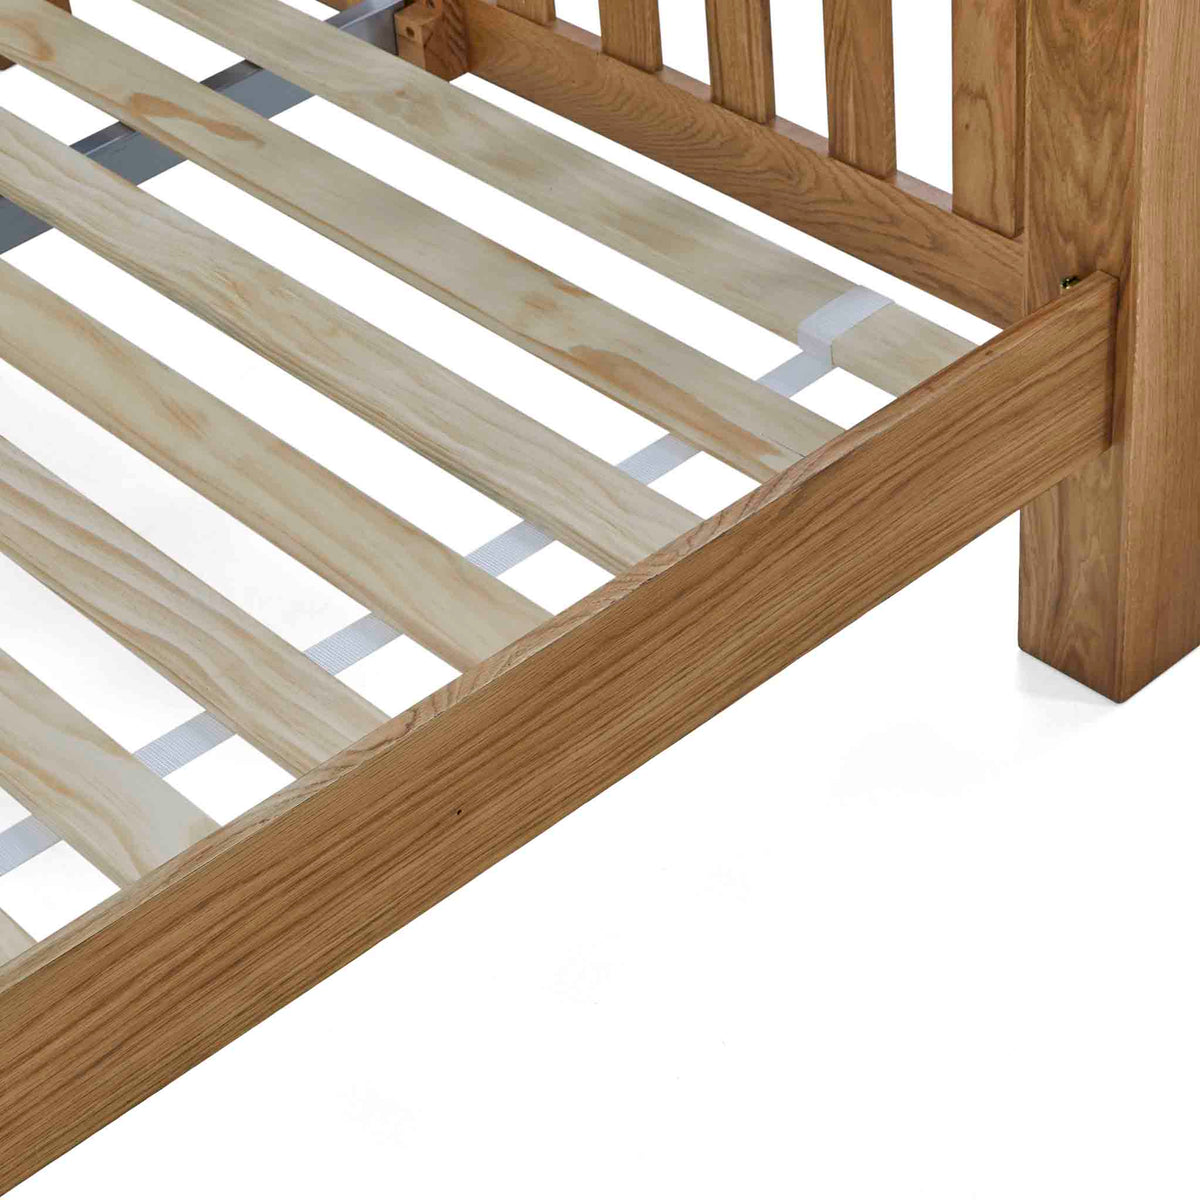 Abbey Grande Oak Bed Frame Double or King Size - Close up of slats and middle bar on bedframe